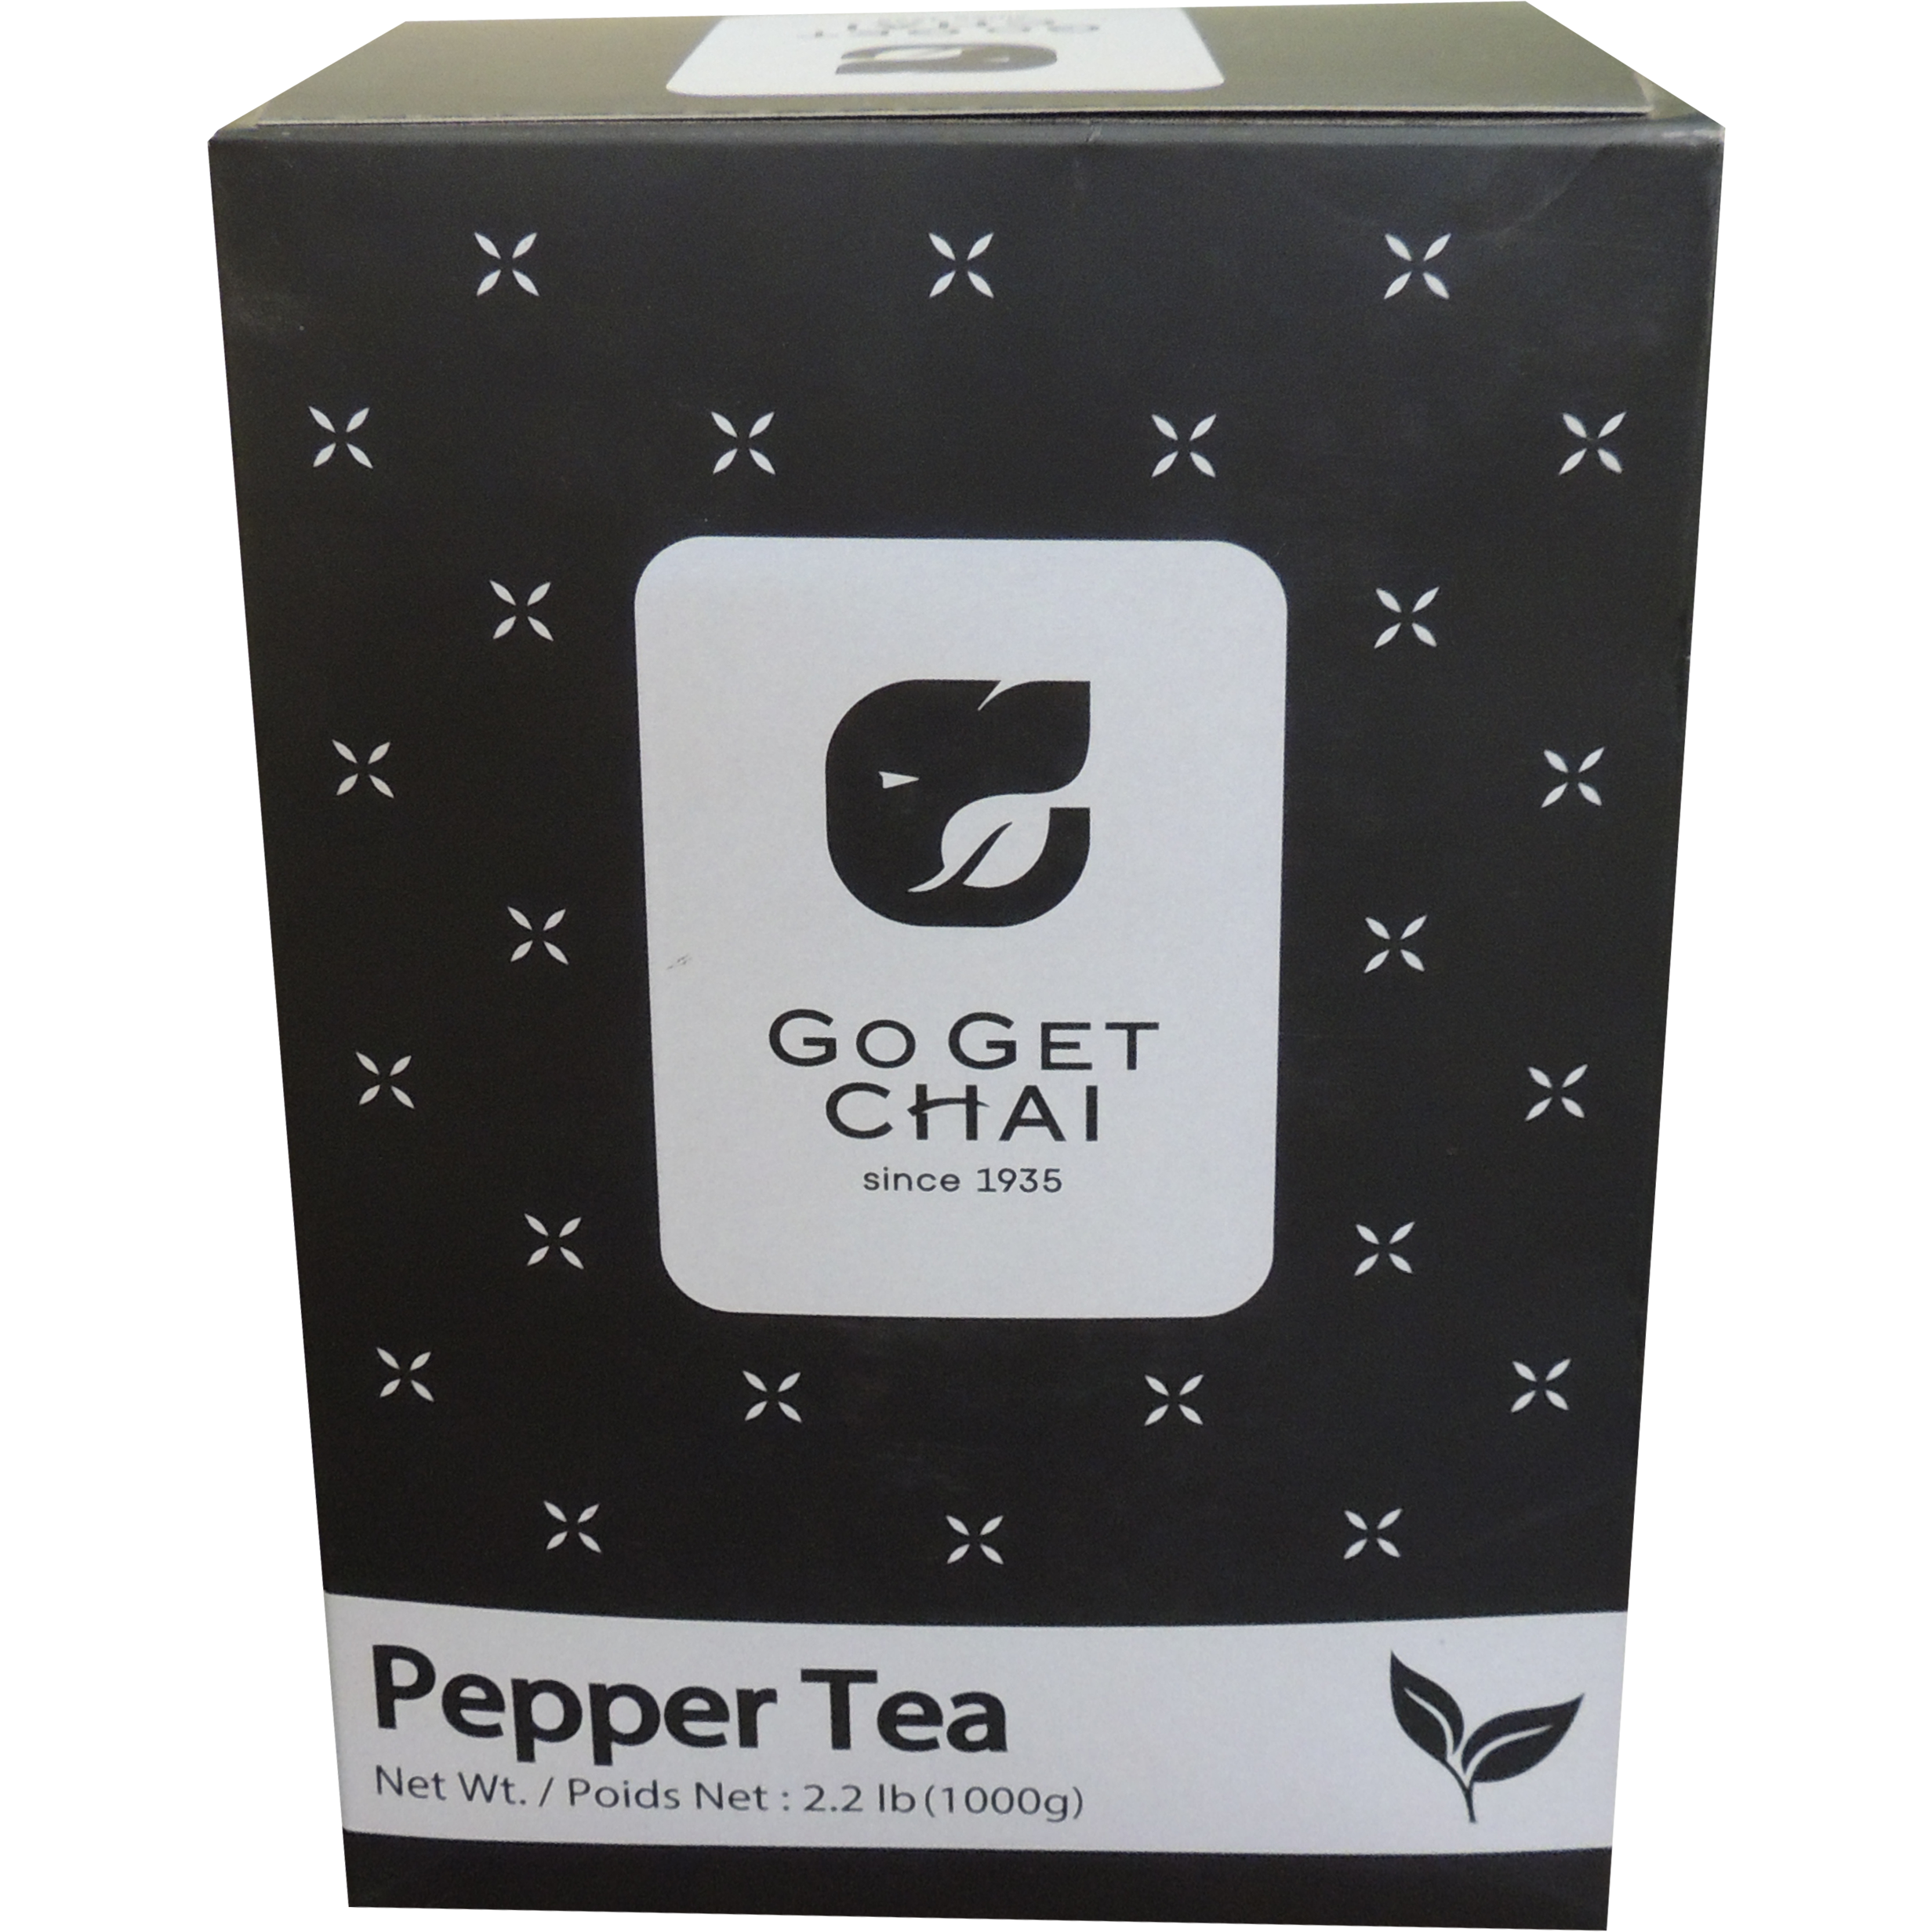 Black tea naturally flavored with Black Pepper.